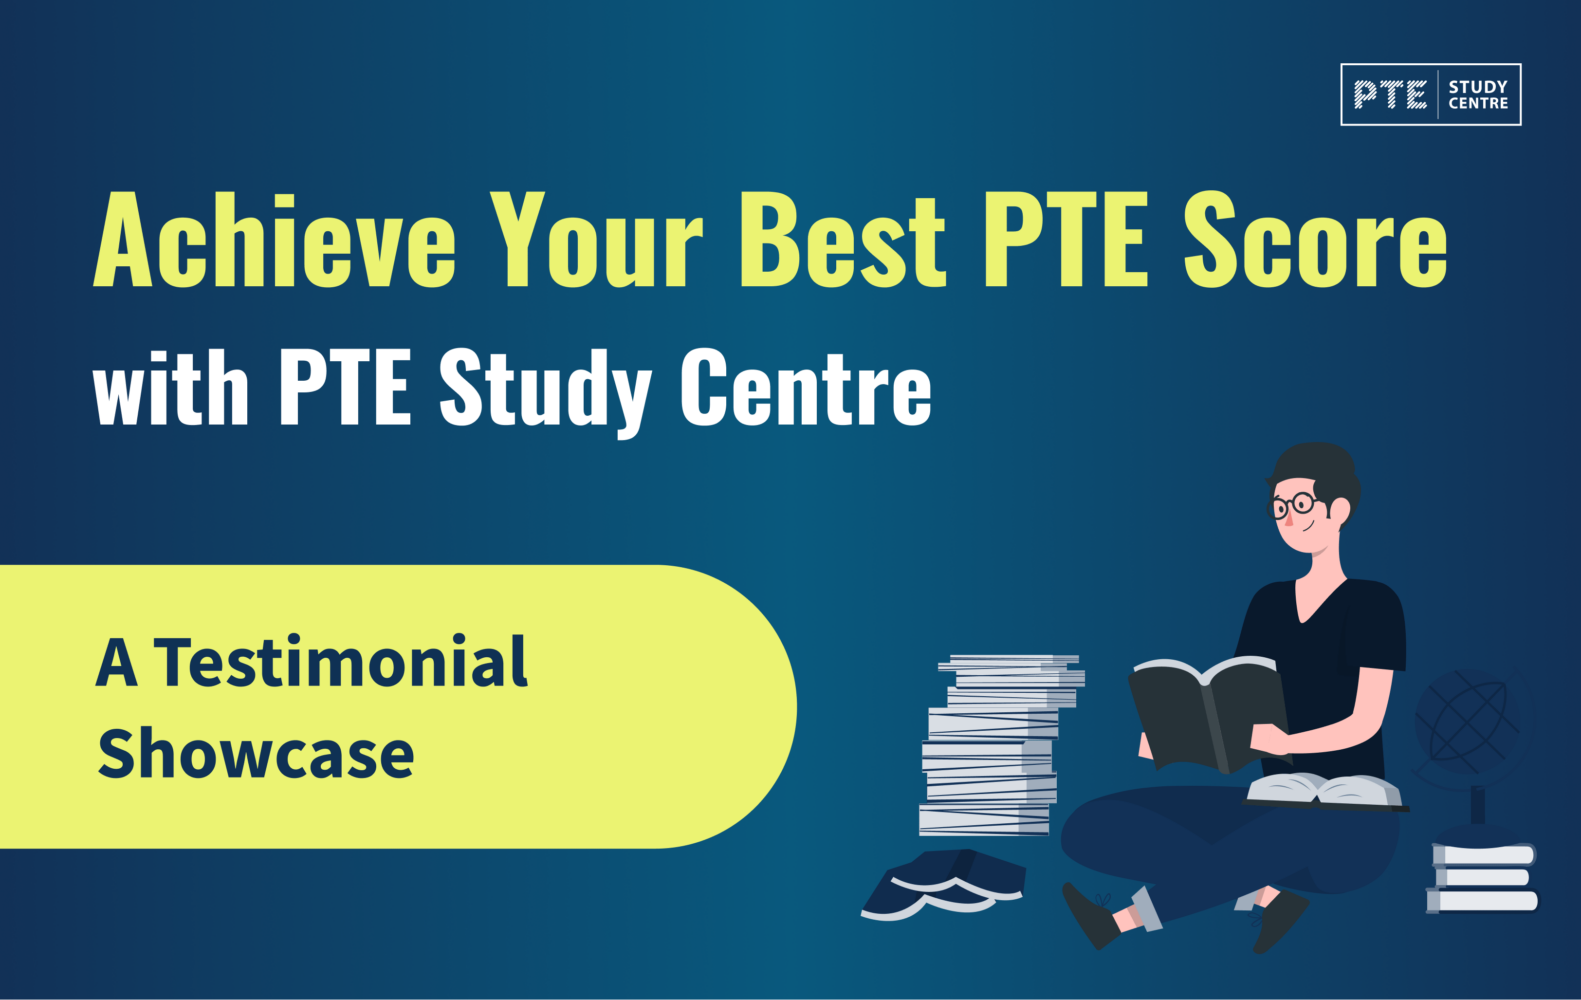 Achieve Your Best PTE Score with PTE Study Centre: A Testimonial Showcase